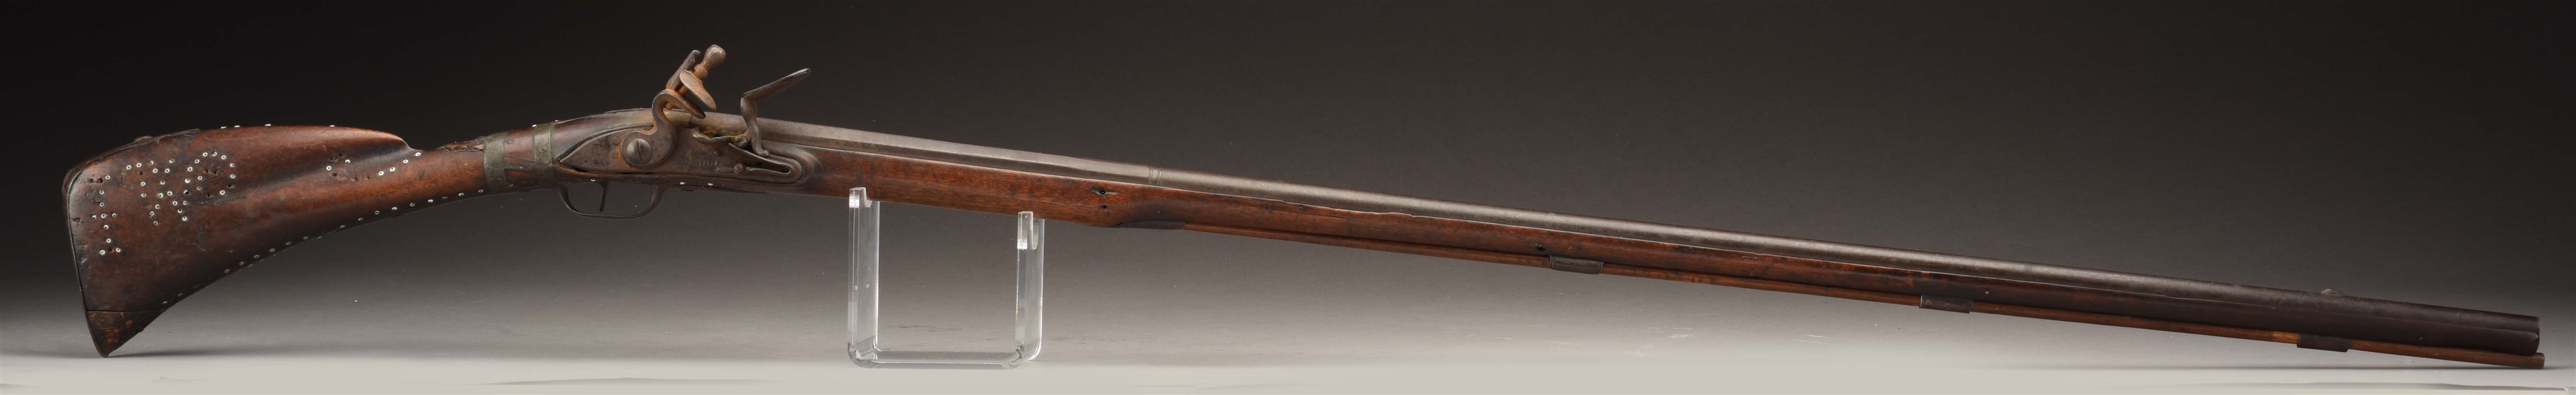 FINE FRENCH FUSIL DE CHASSE WITH BEAD DECORATION, DATED 1759.